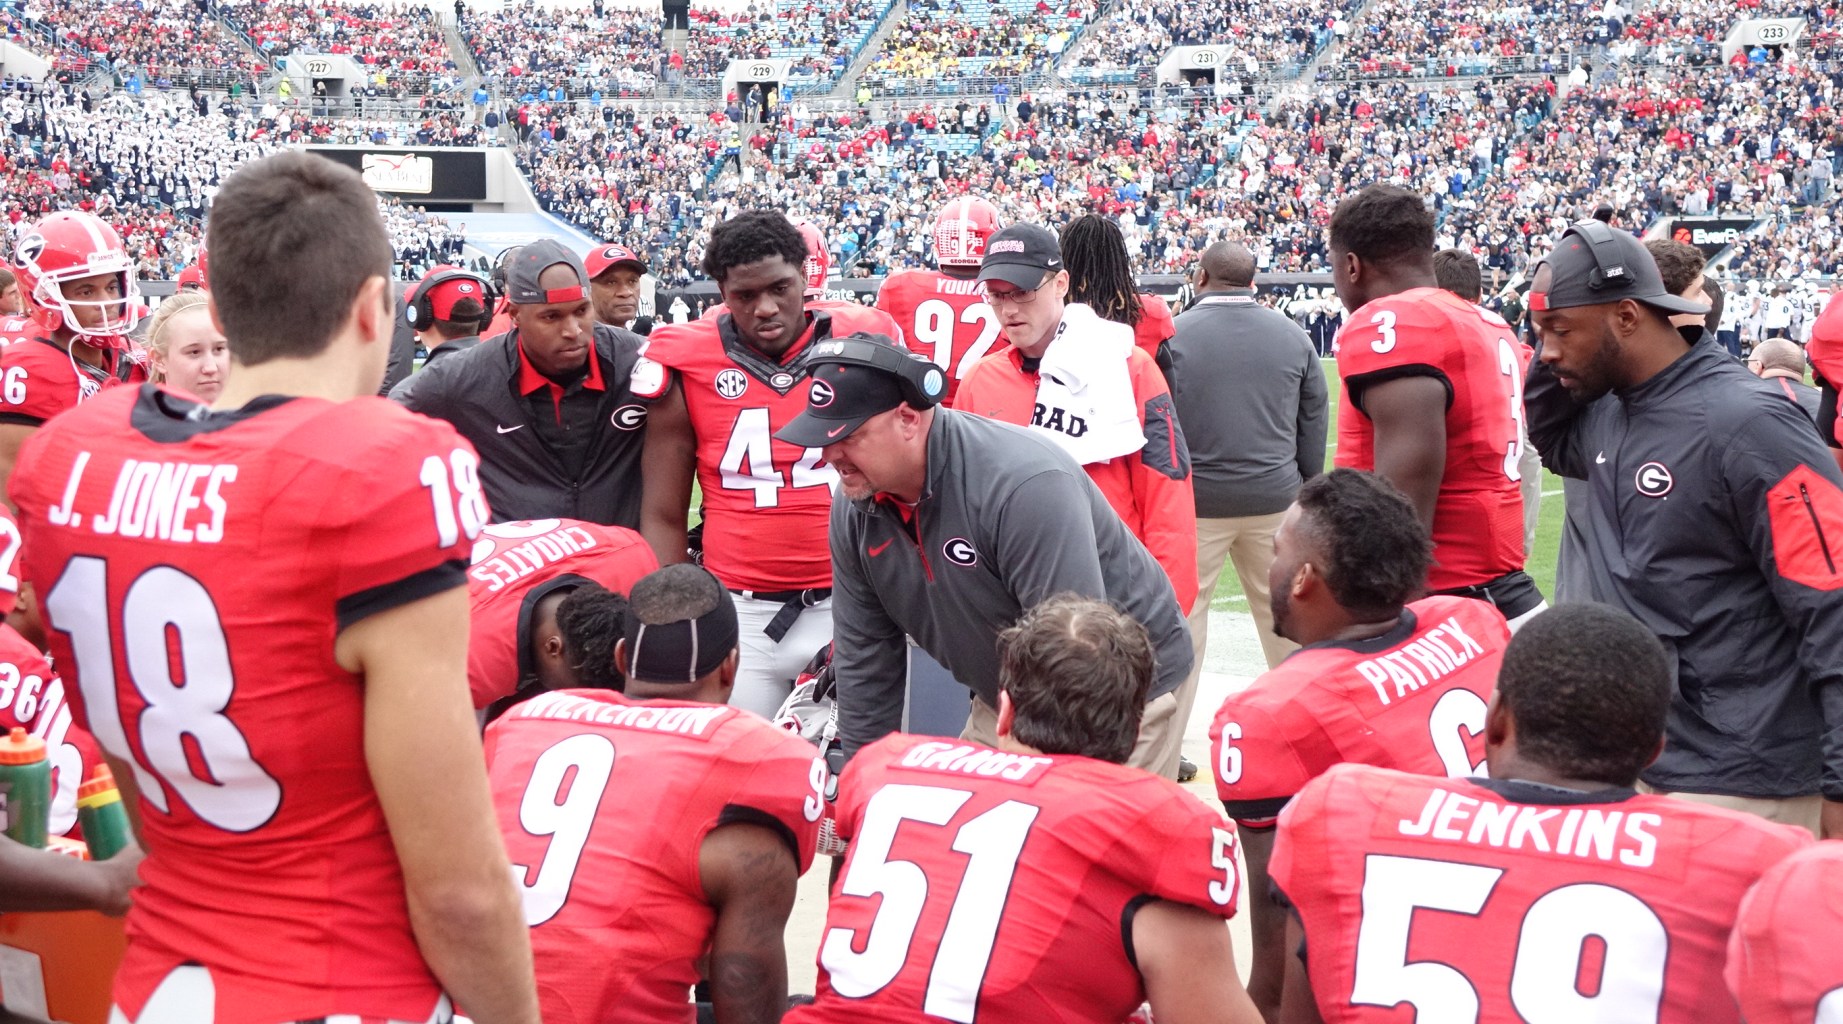 Georgia Defensive Coach Kevin Sherrer talks with defense after they get a stop - first half TaxSlayer Bowl 02-JAN-2016 (Photo by Greg Poole)